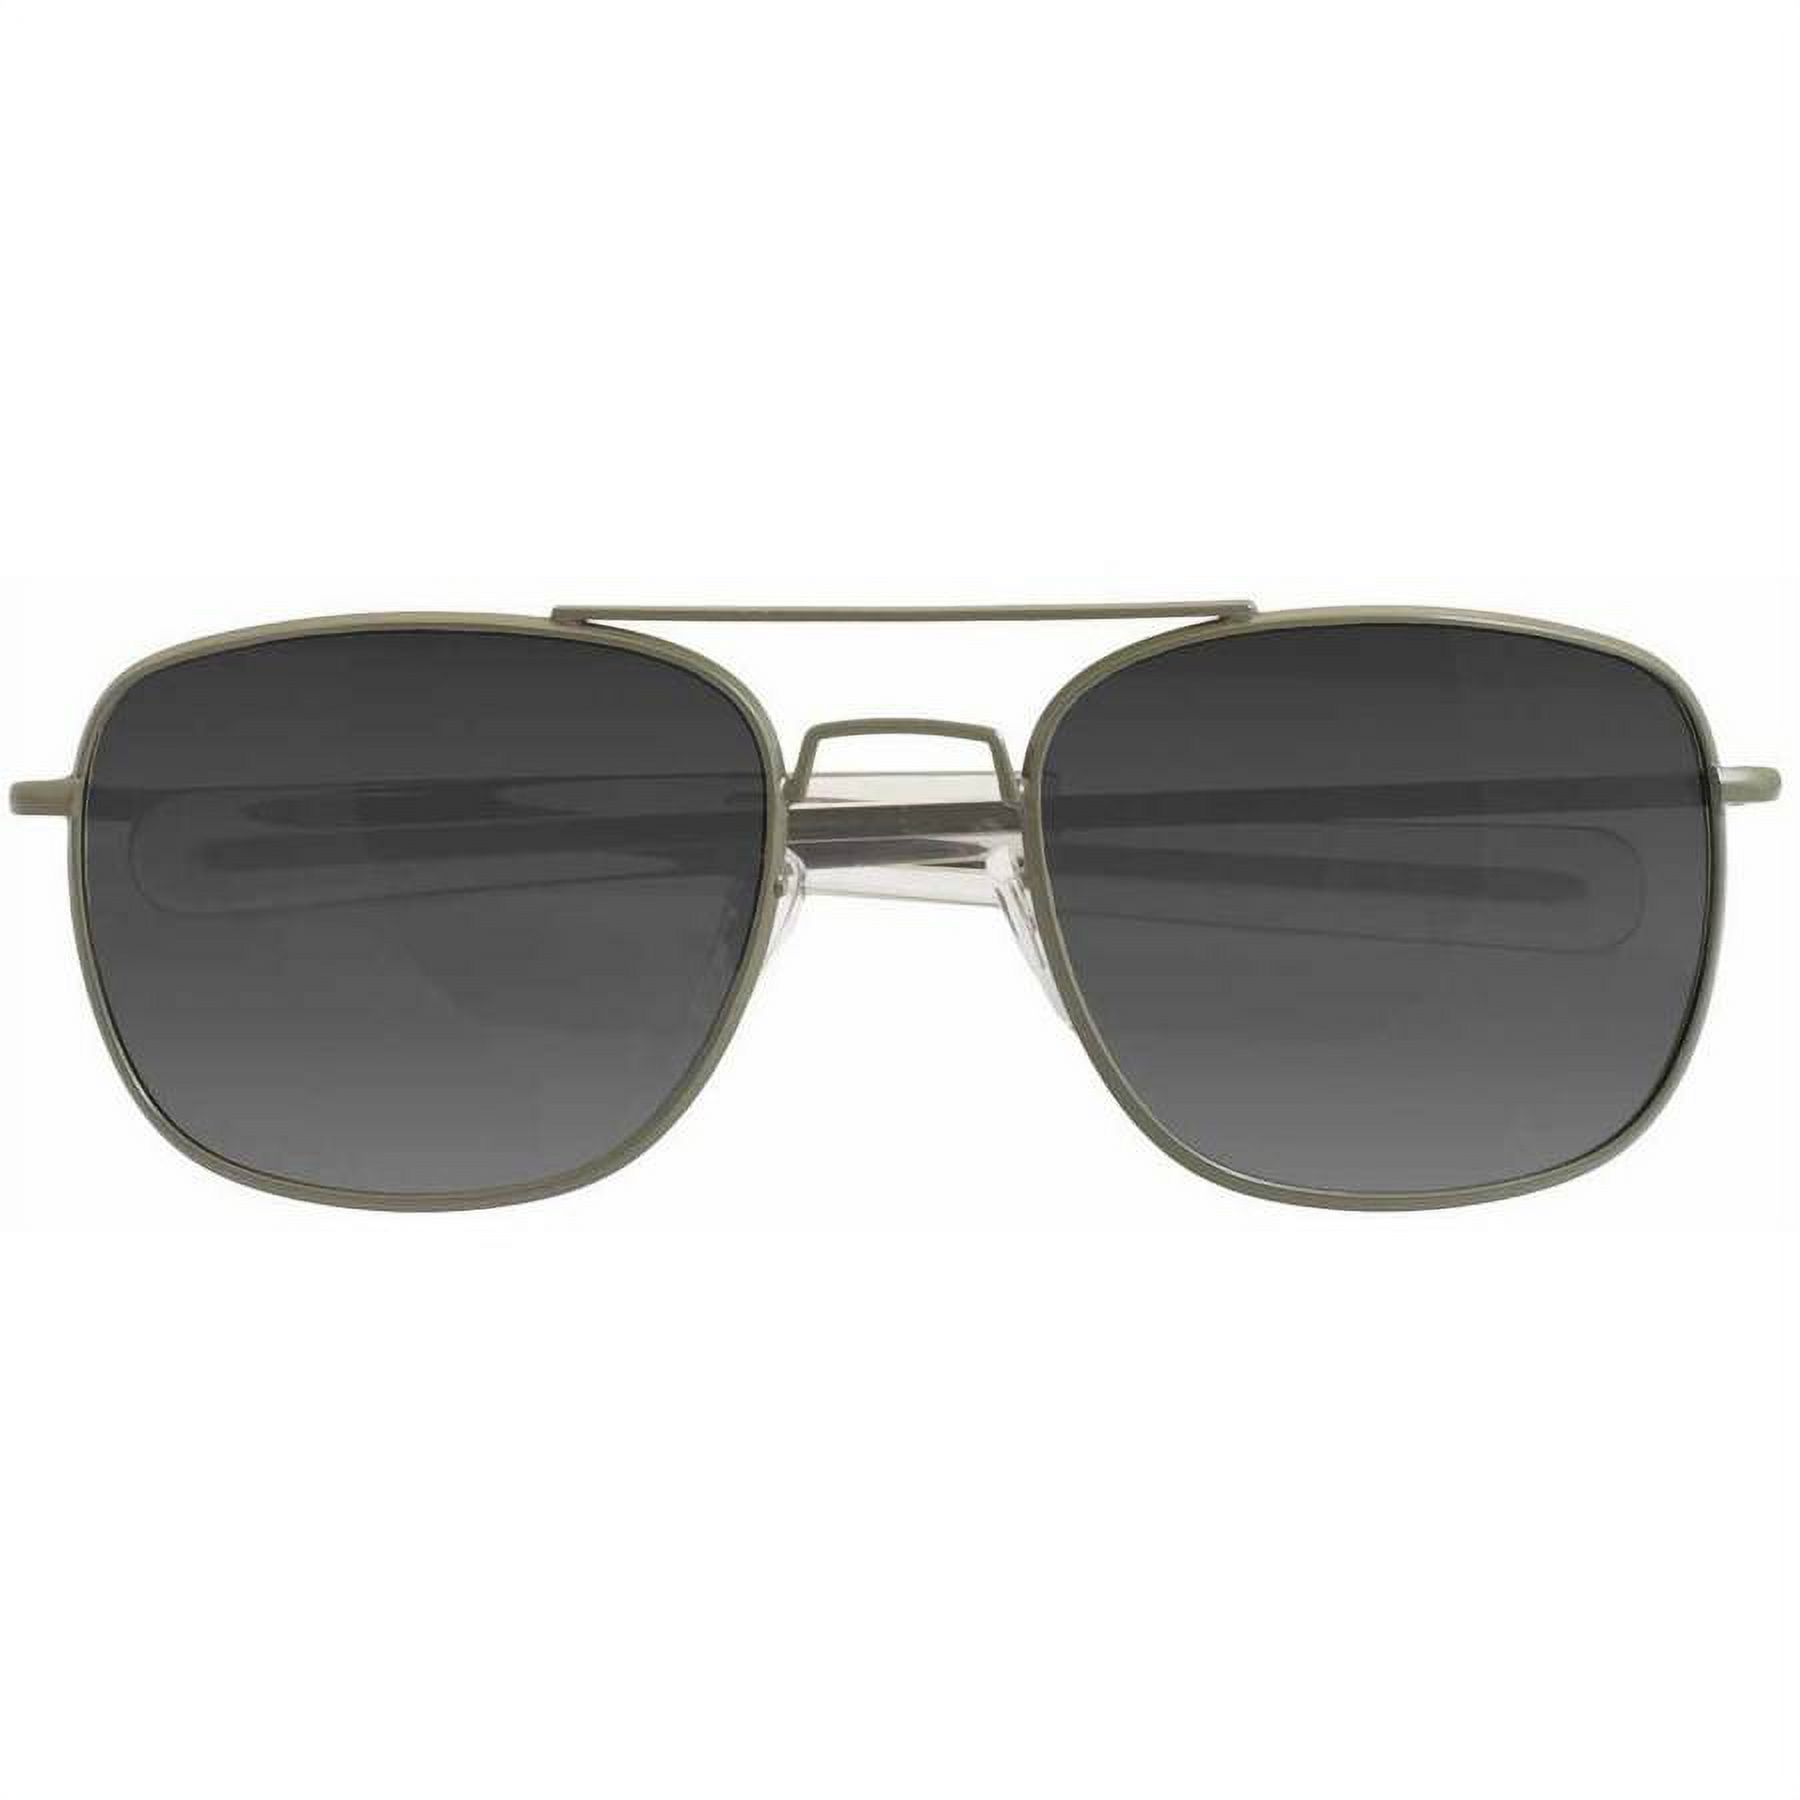 Bayonette Style Military Sunglasses, , 57mm, Comes in Multiple Colors - image 2 of 3